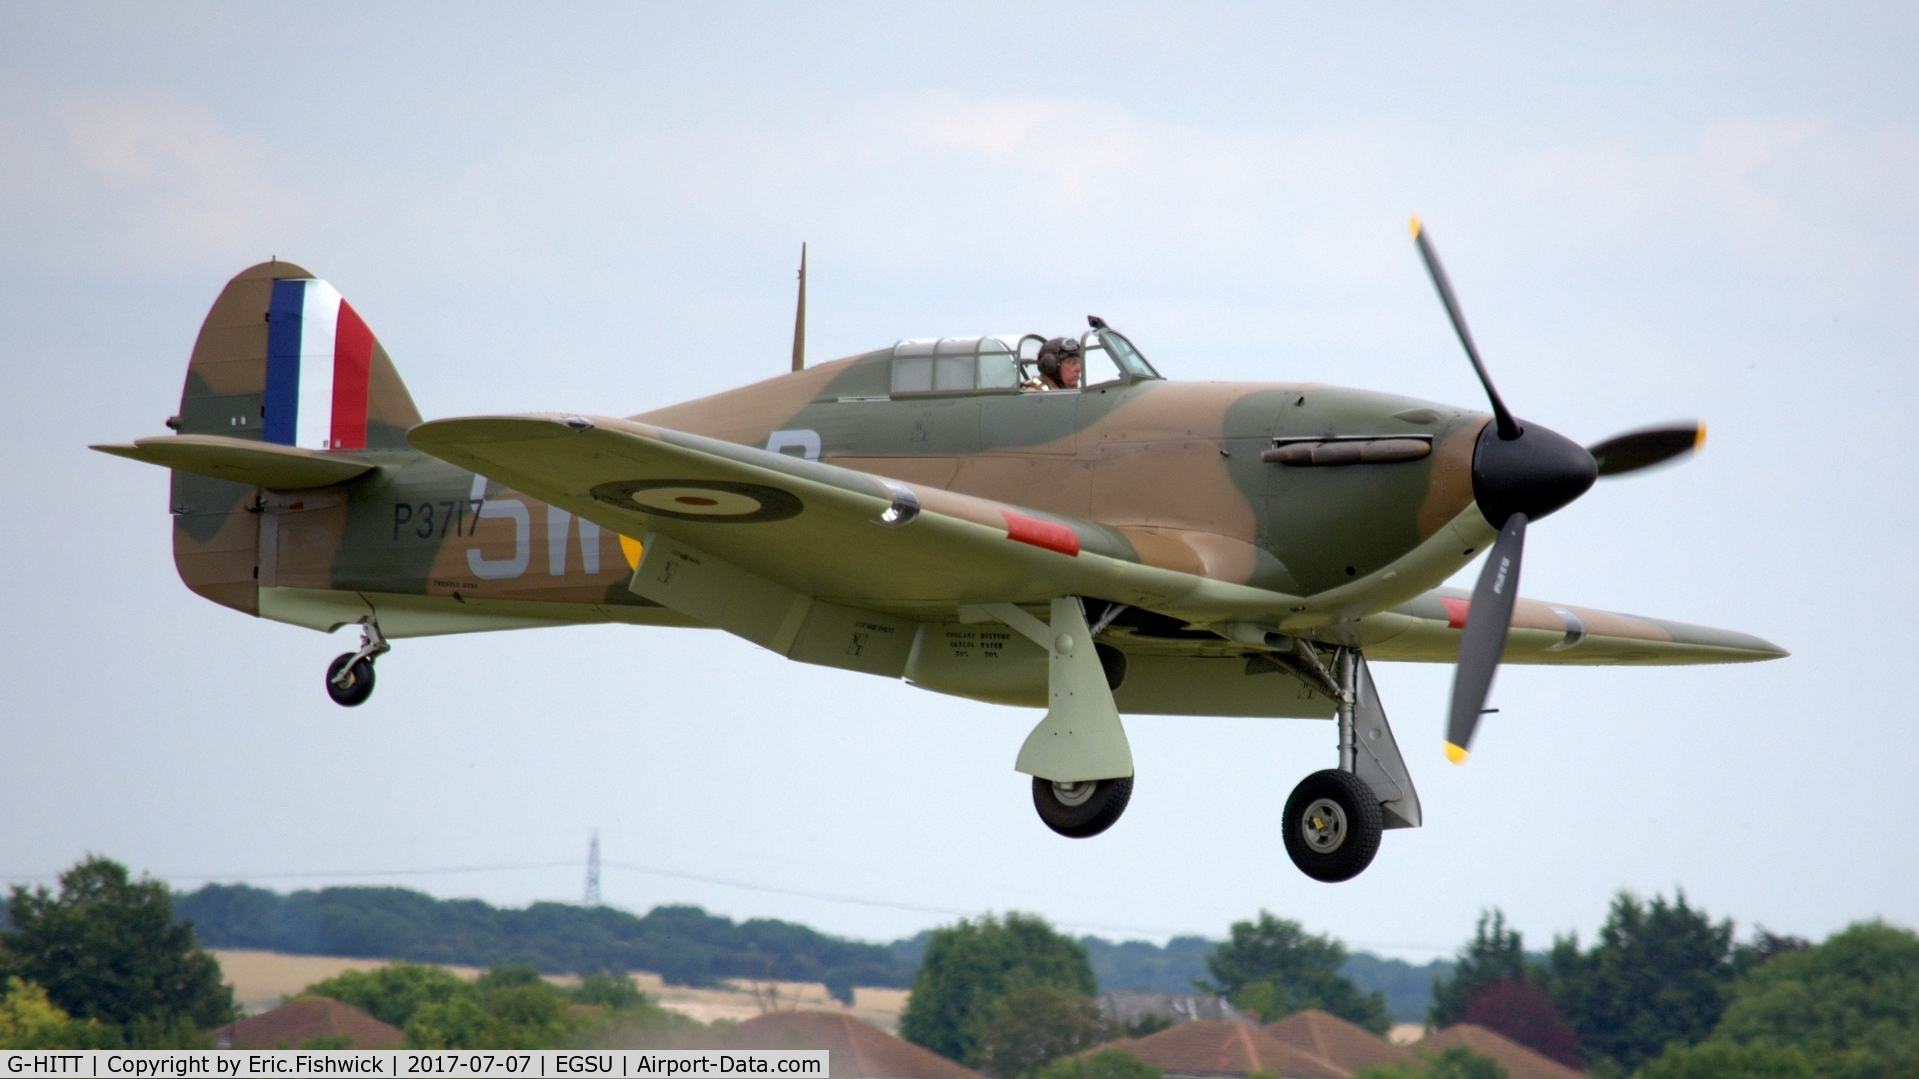 G-HITT, 1940 Hawker Hurricane I C/N Not found / see comment, 3. P3717 on the eve of The Flying Legends Airshow, July 2017.